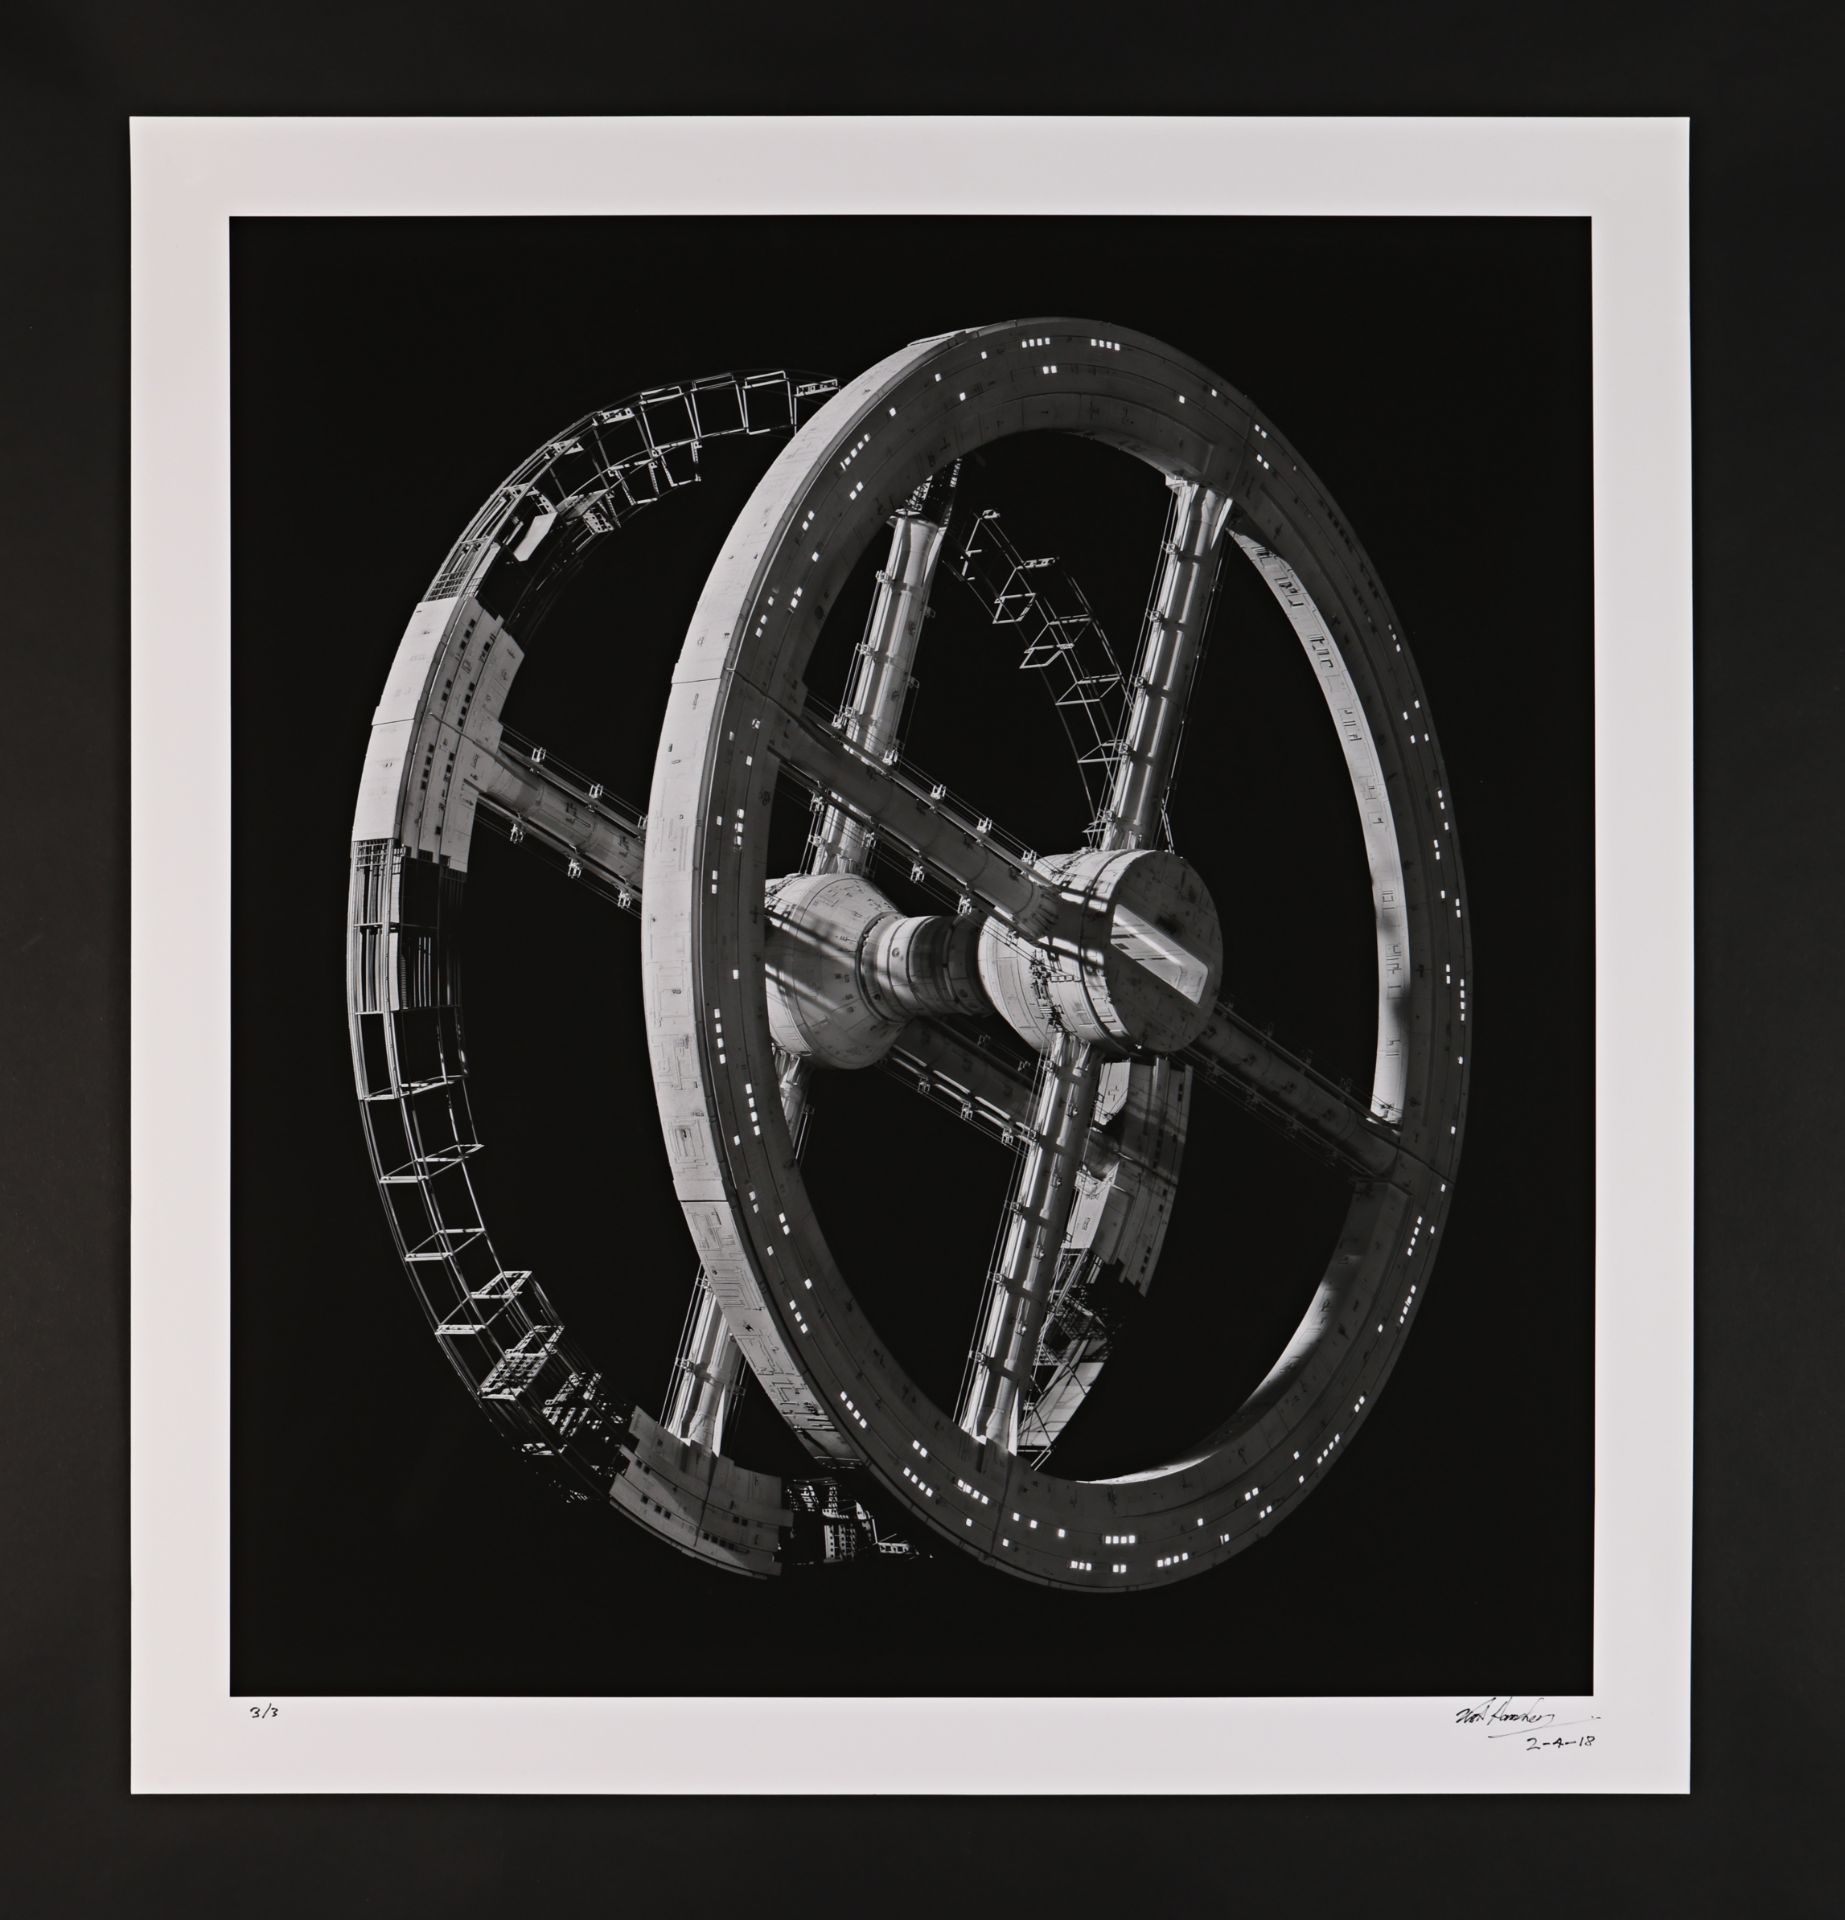 2001: A SPACE ODYSSEY (1968) - Signed and Hand-Numbered Limited Edition Print of Space Station Light